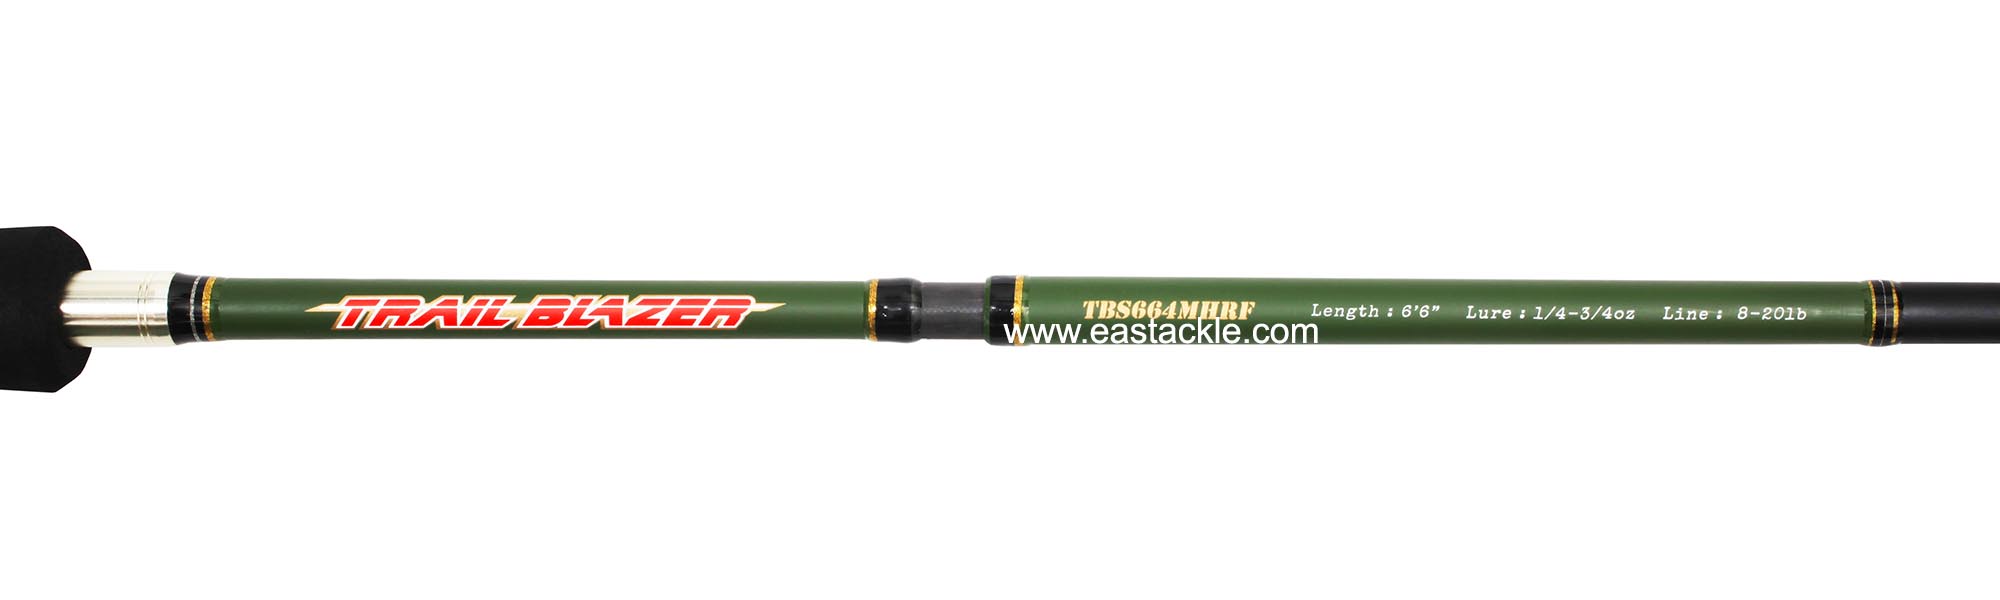 Rapala - Trail Blazer - TRS664MHRF - Spinning 4 Piece Travel Rod - Logo and Specifications | Eastackle